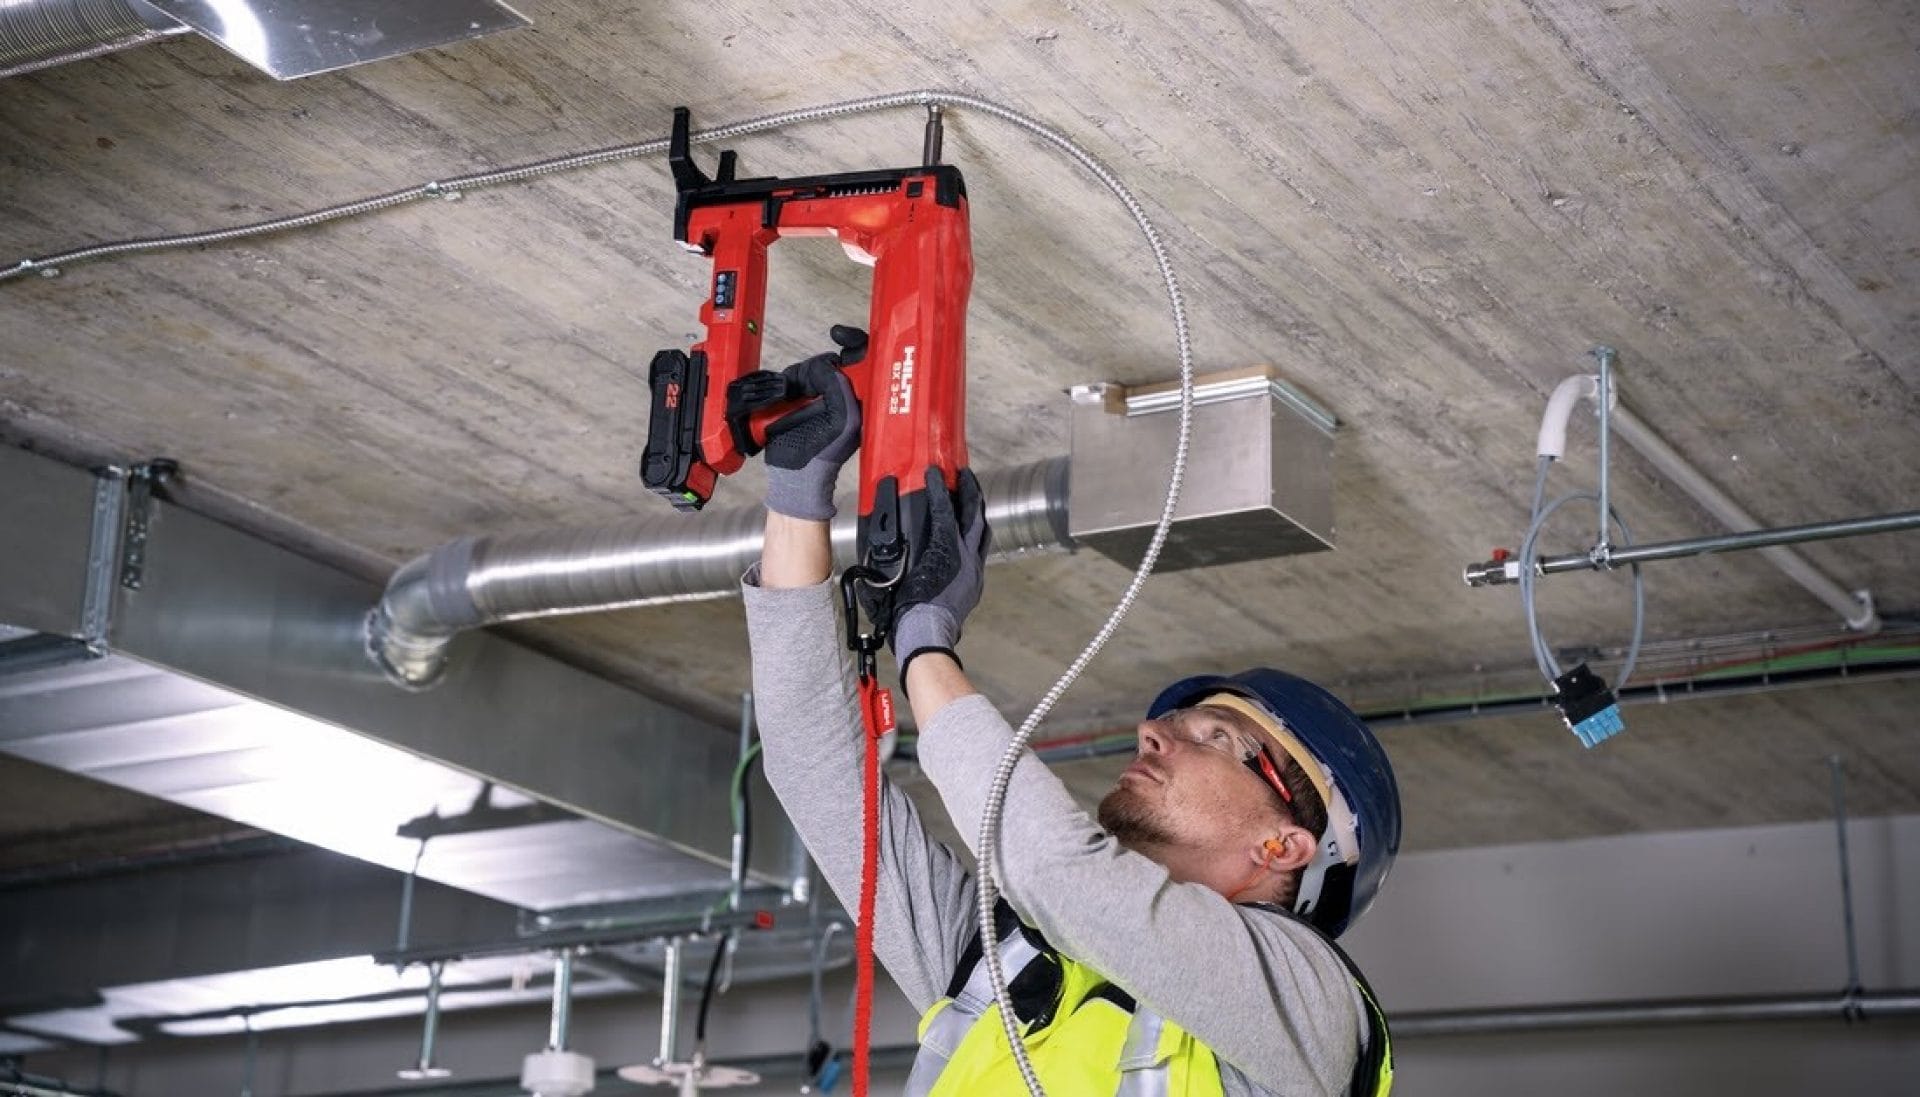 A man in PPE drilling into a roof with a Hilti drill